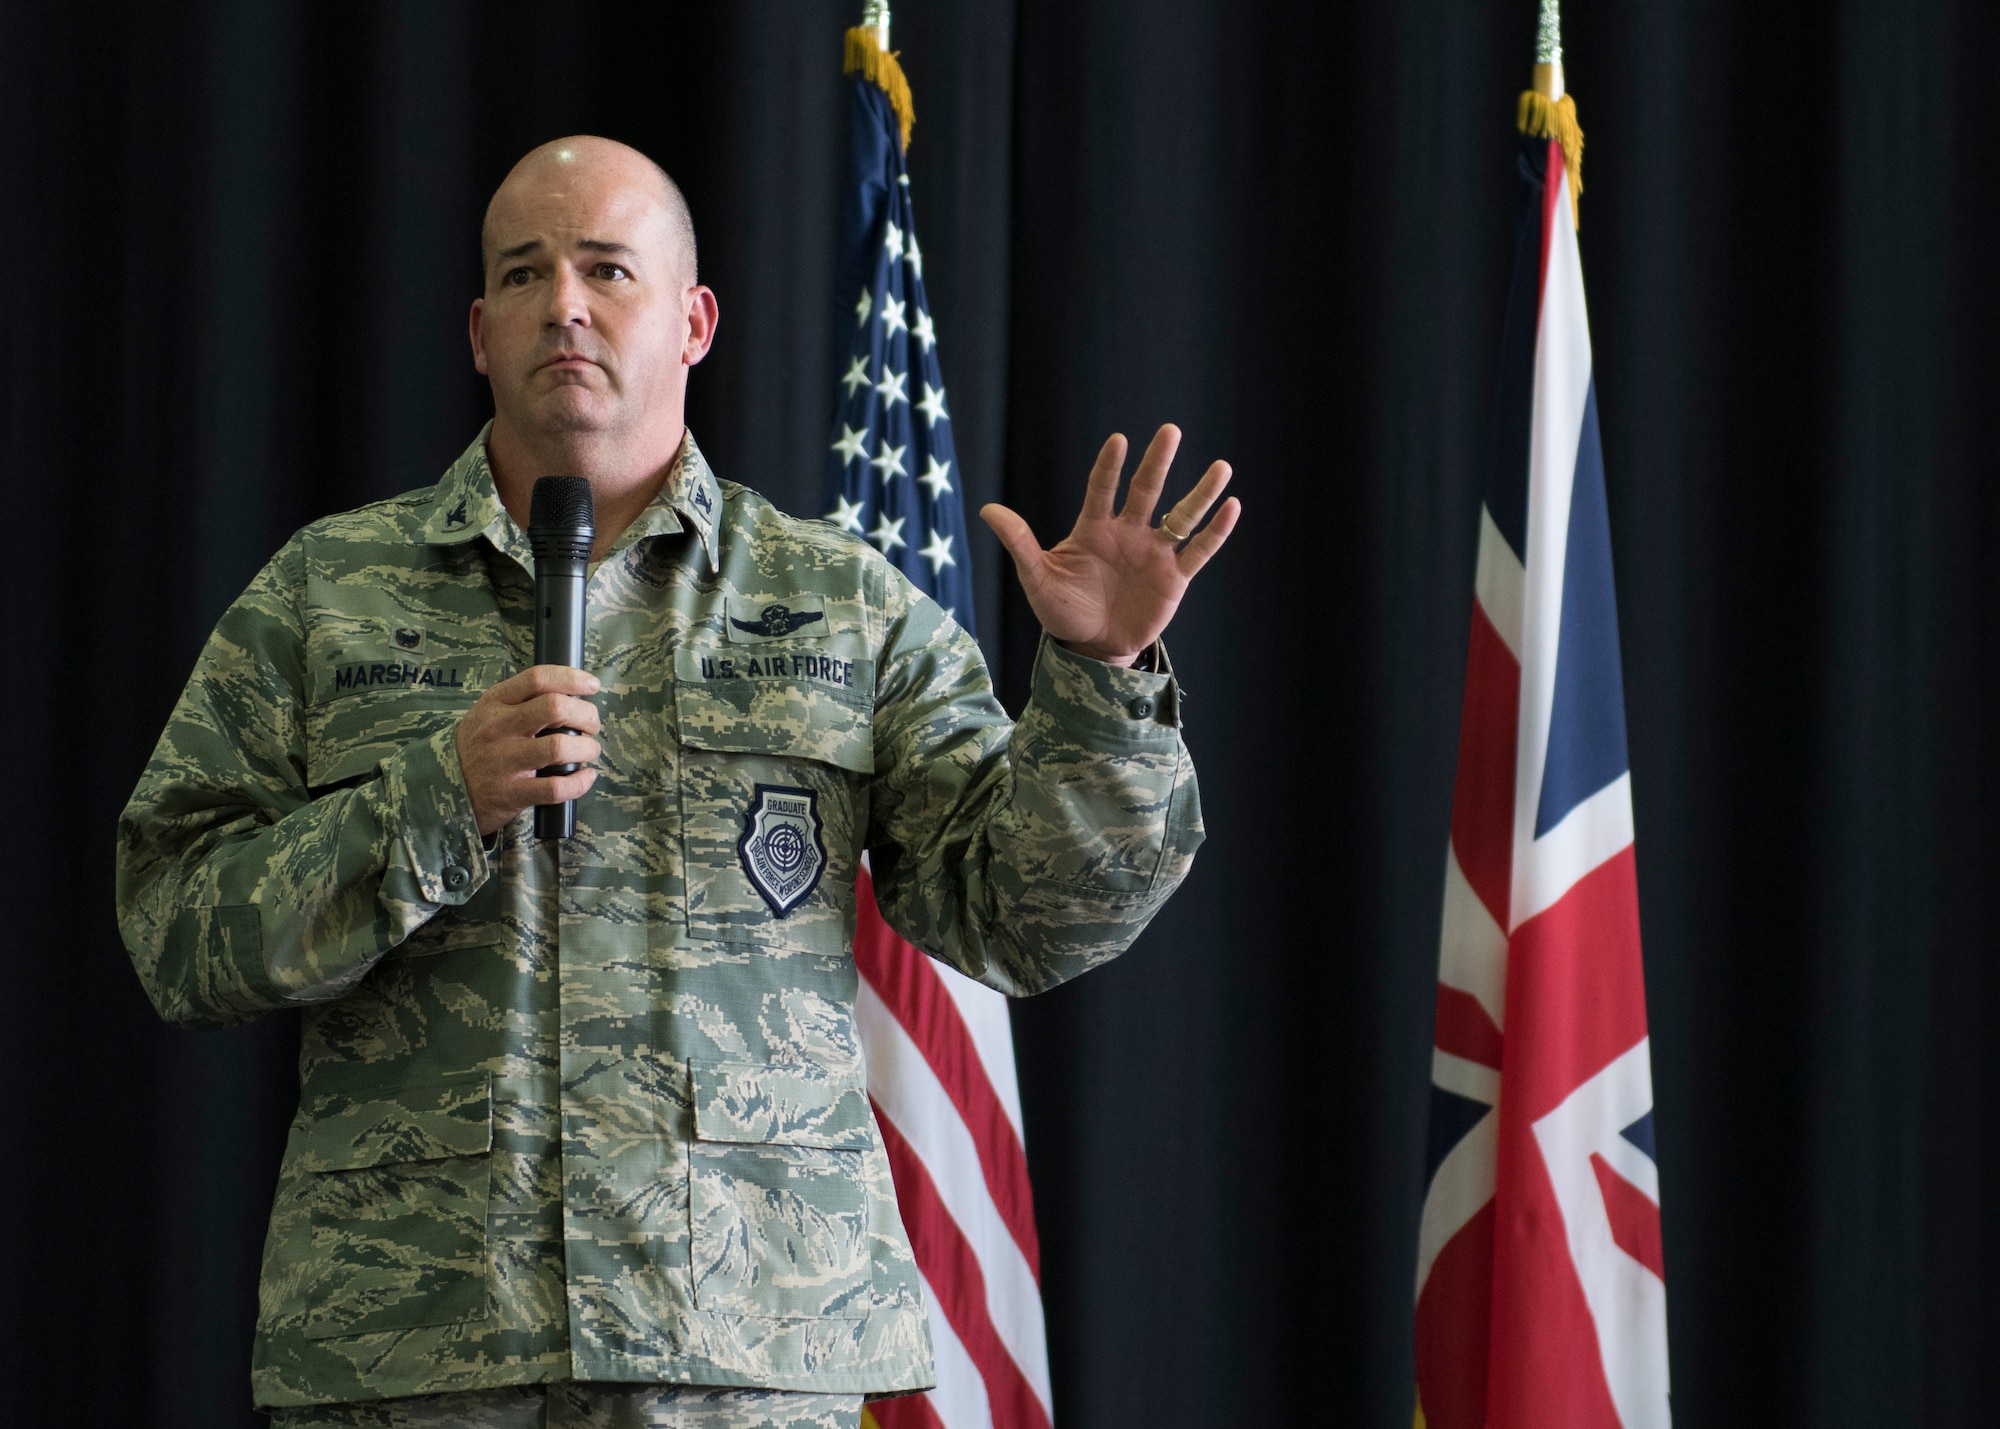 U.S. Air Force Col. William Marshall, 48th Fighter Wing commander, speaks to Liberty Wing Airmen during an All Call at Royal Air Force Lakenheath, England, July 20, 2018. Marshall assumed command of the 48th FW July 16, 2018. (U.S. Air Force photo/ Senior Airman Malcolm Mayfield)